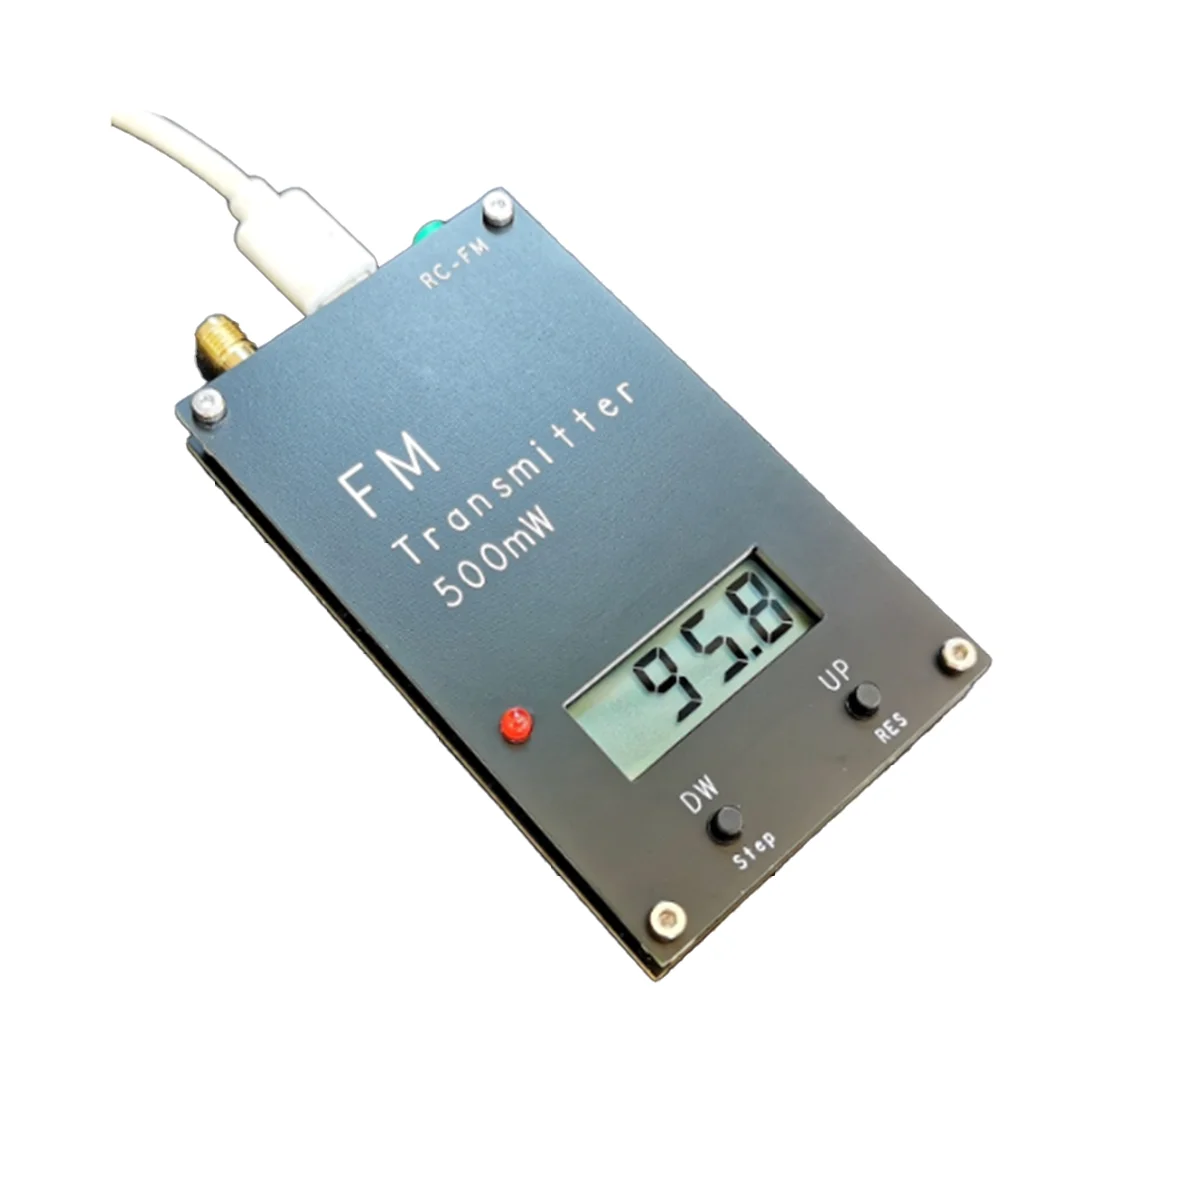 

2000M 0.5W FM Transmitter Stereo Digital LED Display Frequency 88M-108MHz for Campus Radio DSP Radio Broadcast